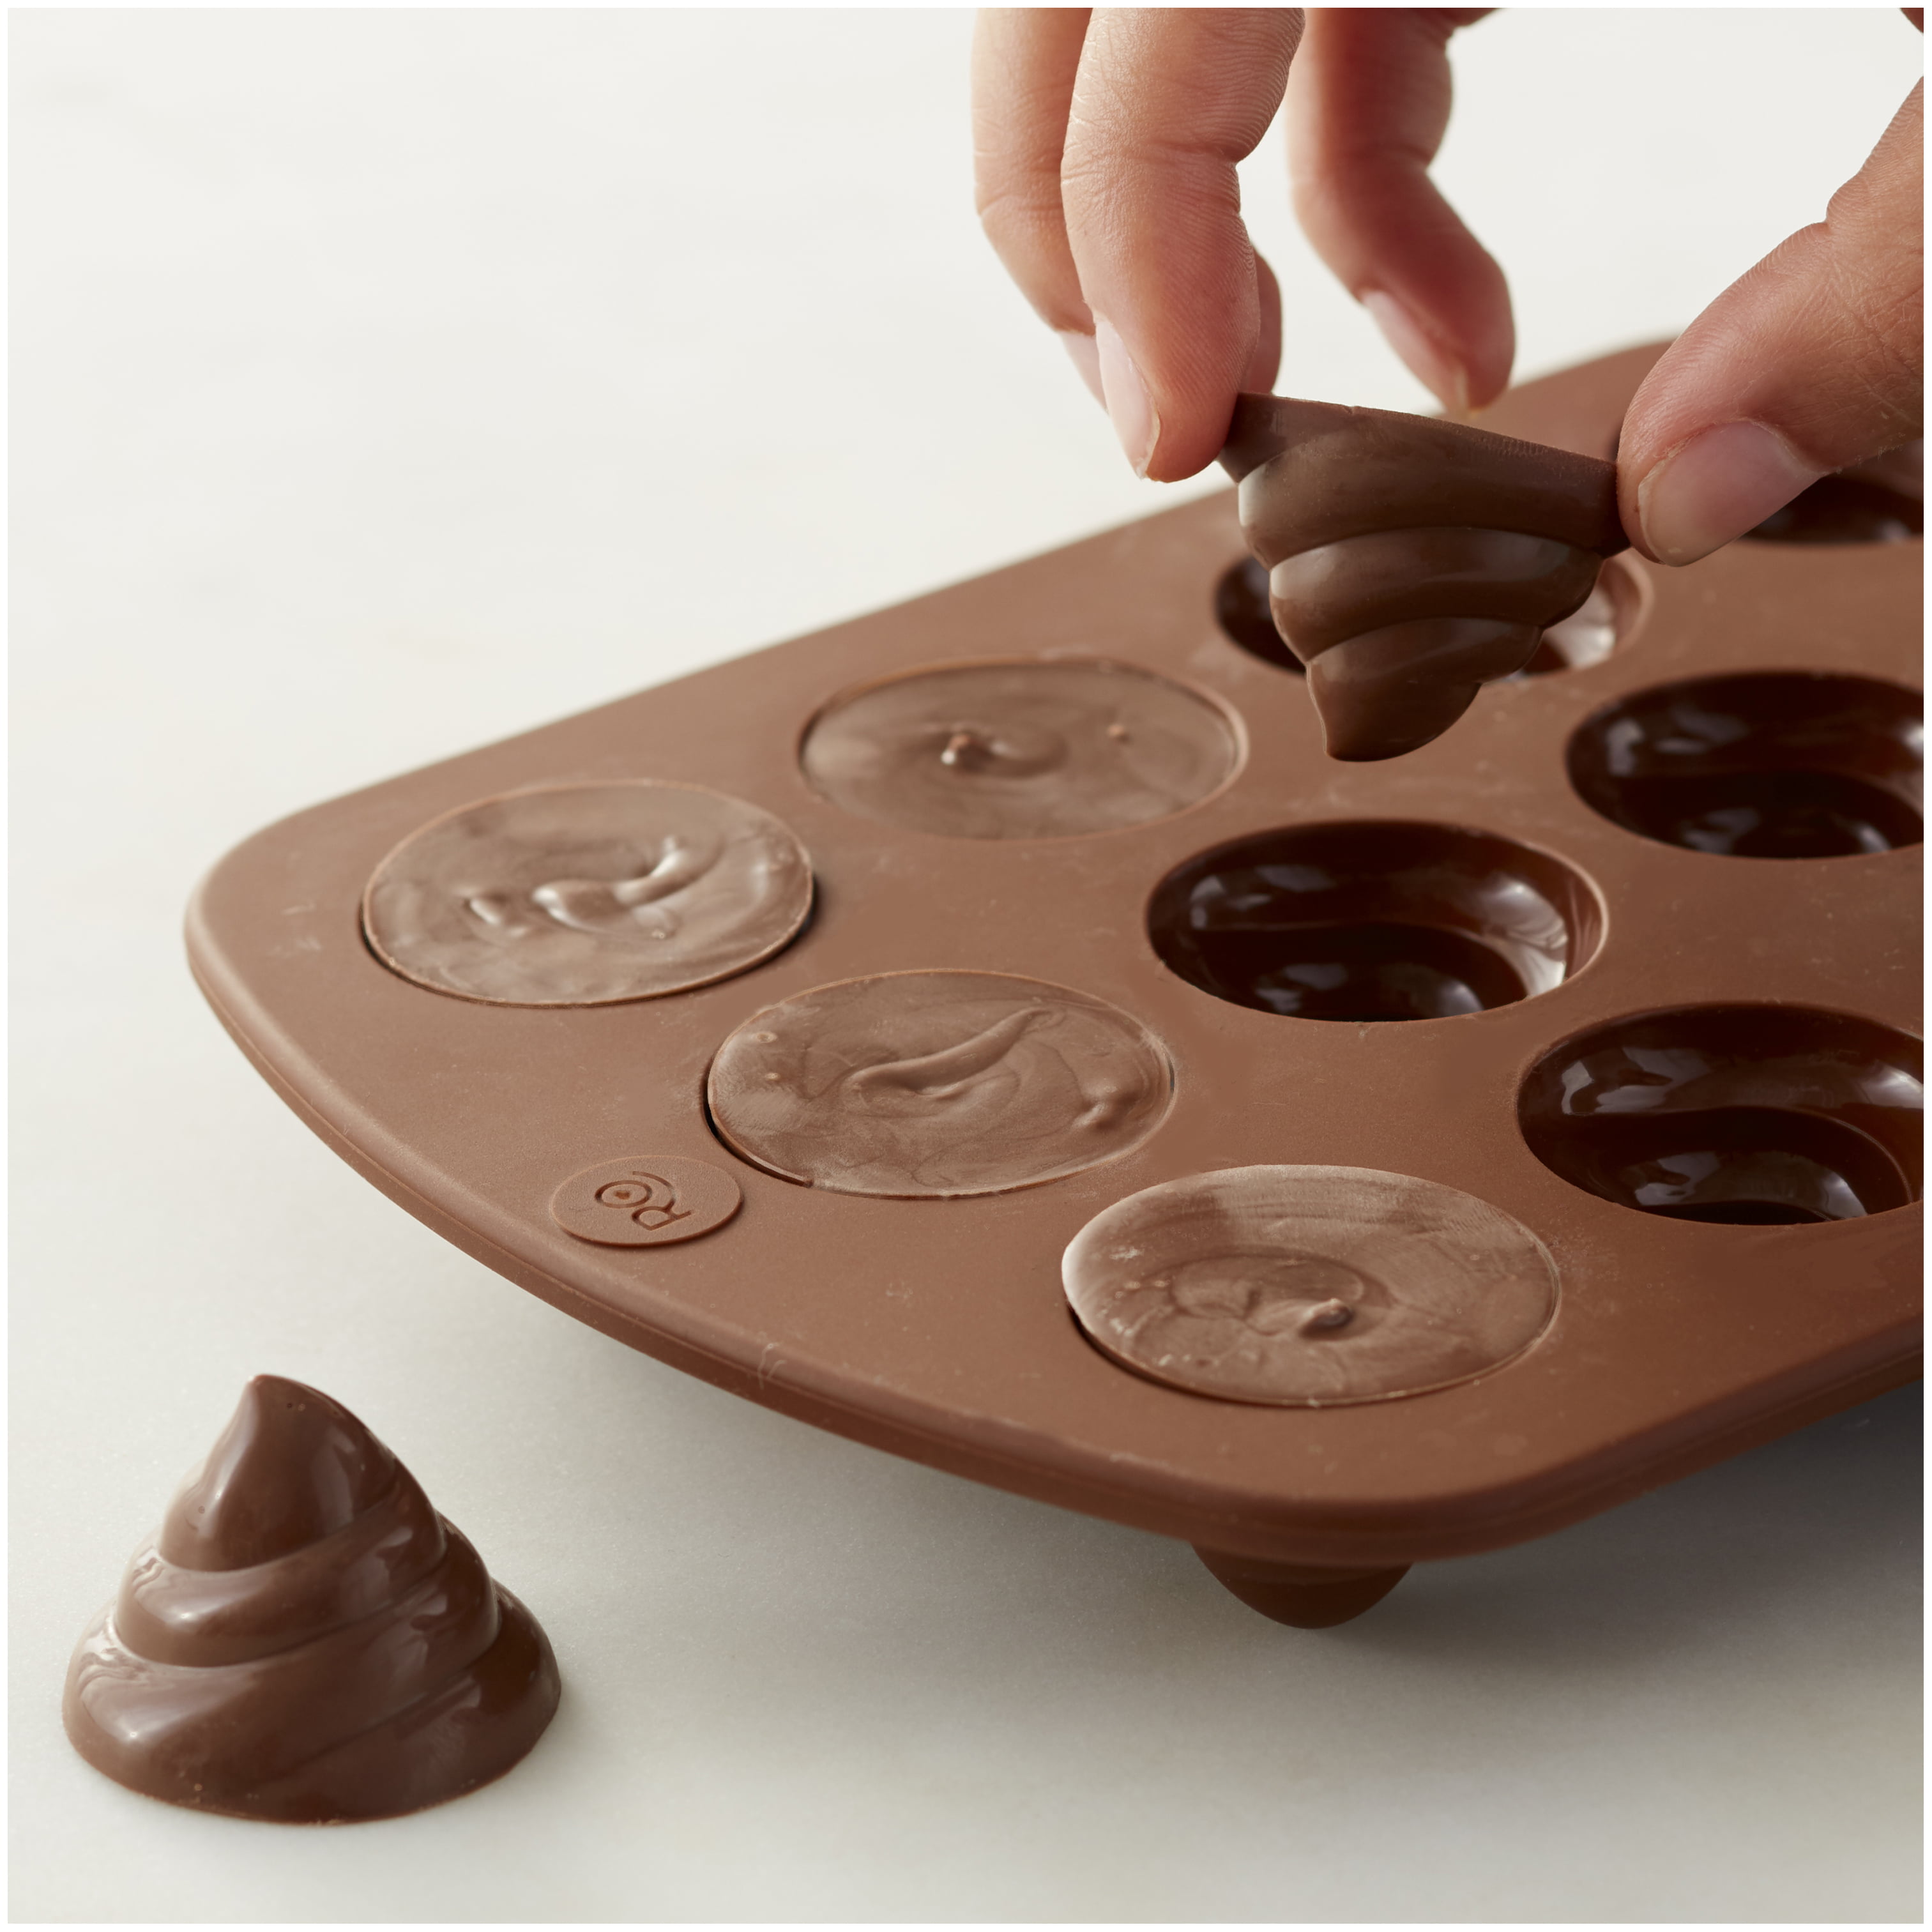 Silicone Funy Emojis Chocolate Candy Molds: Silicone Baking Molds